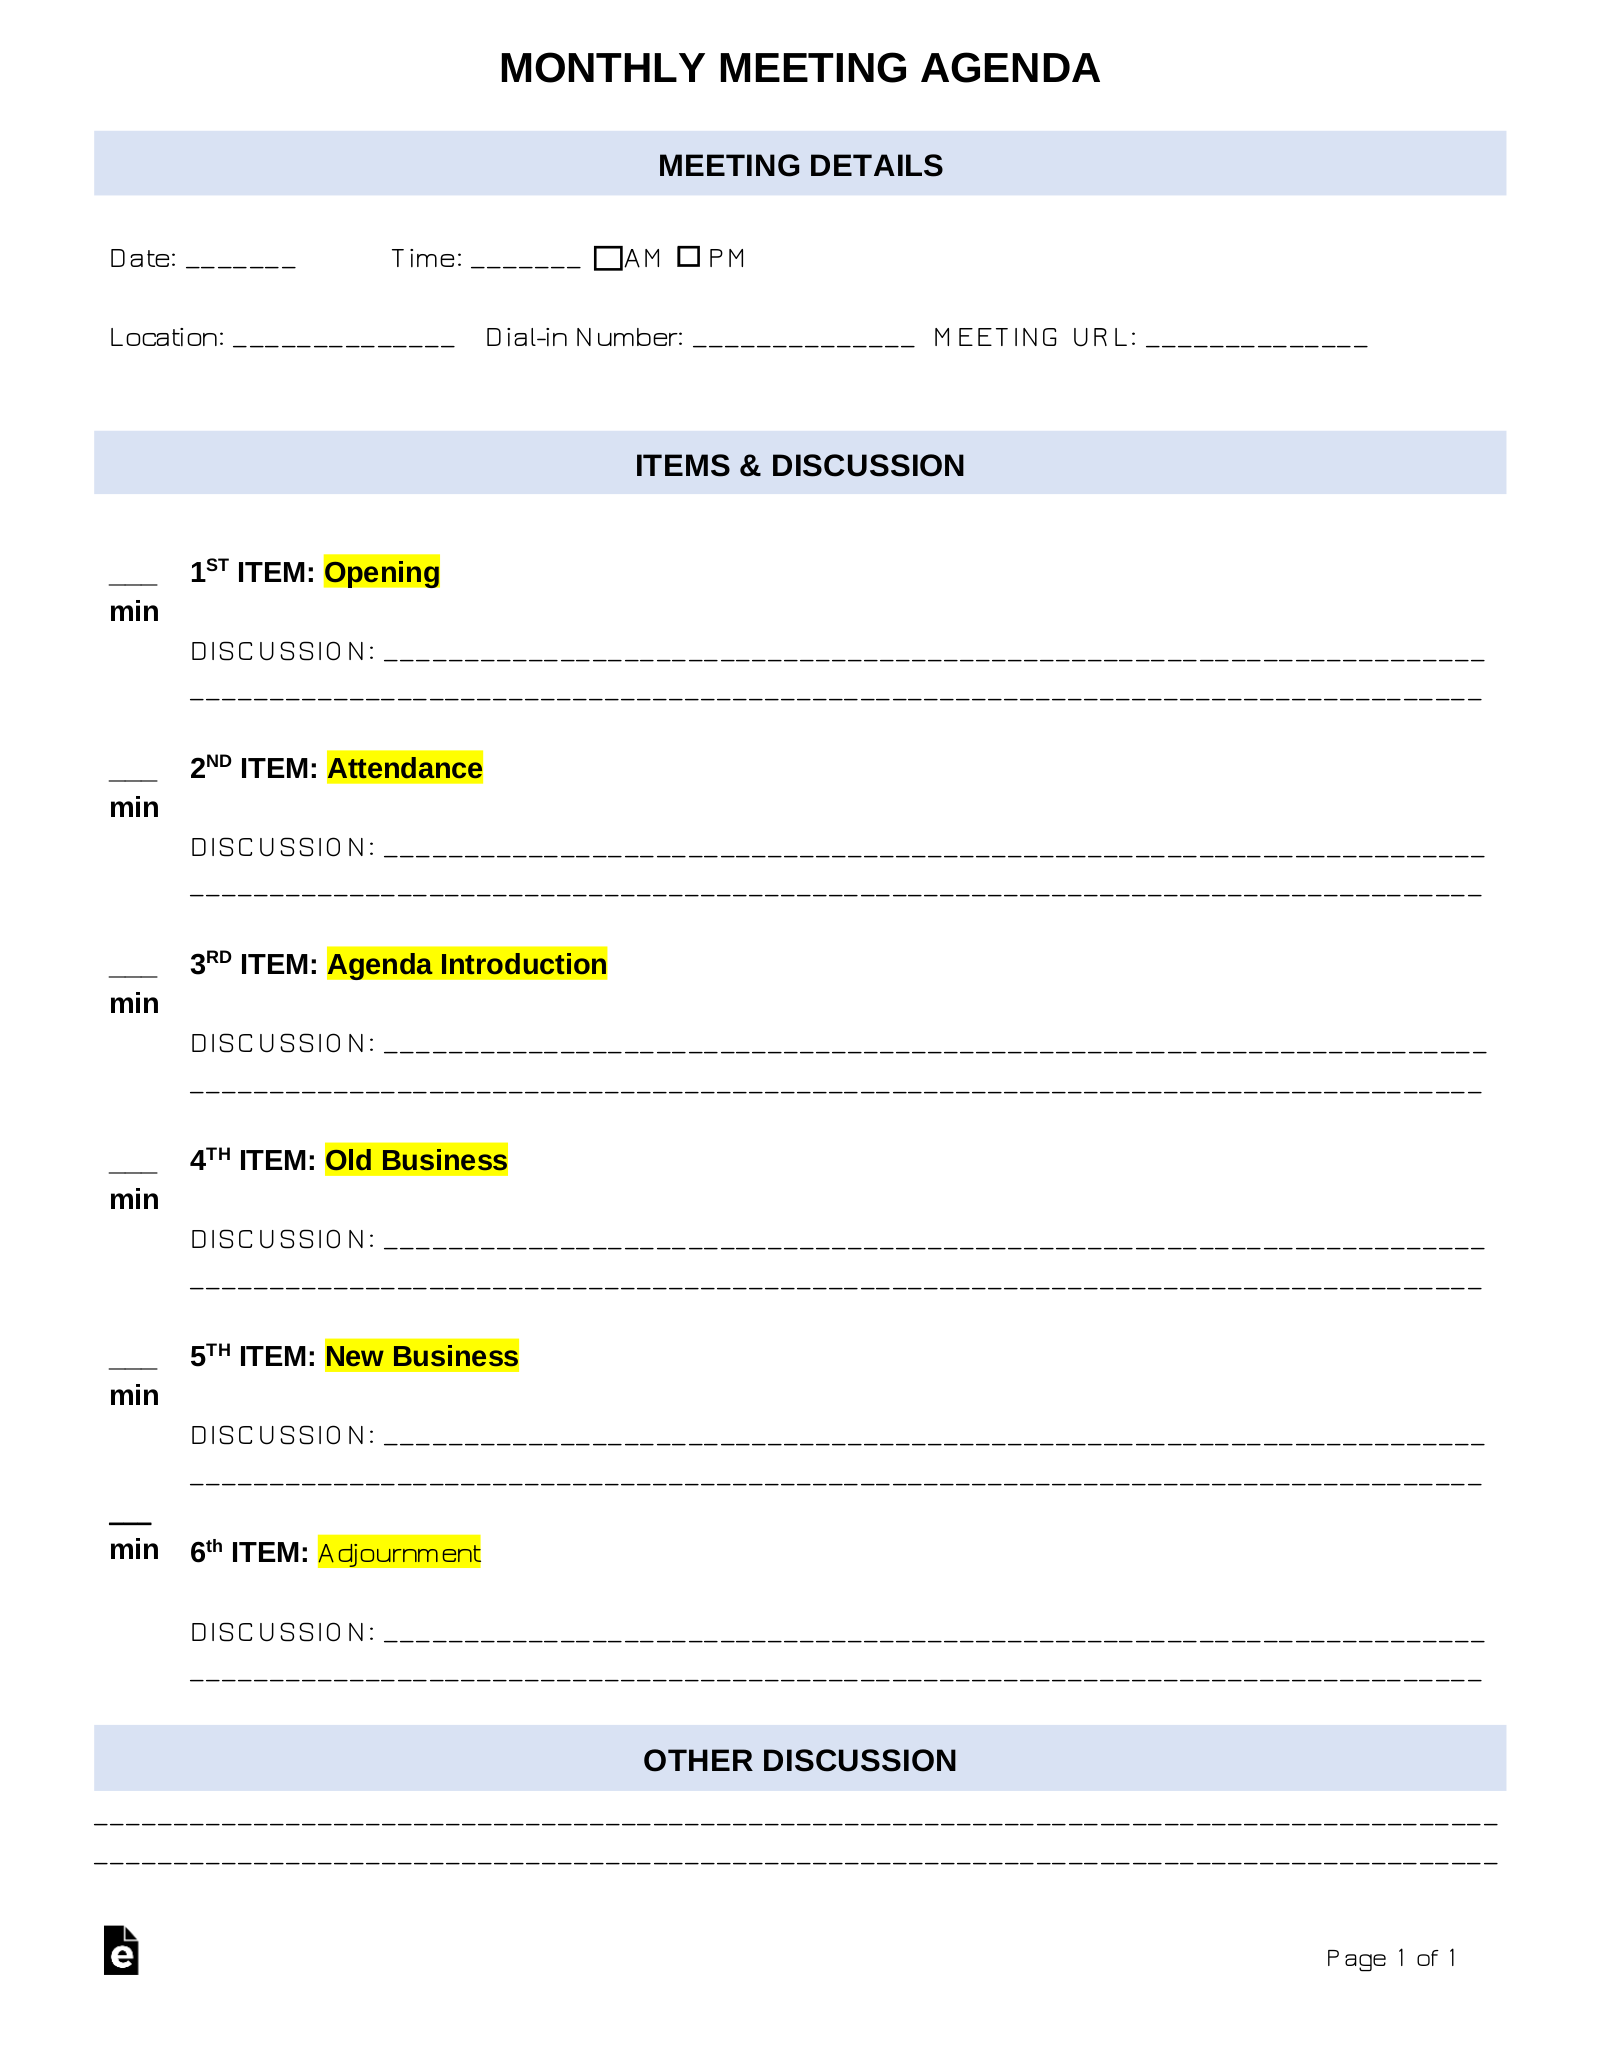 Monthly Meeting Agenda Template | Sample